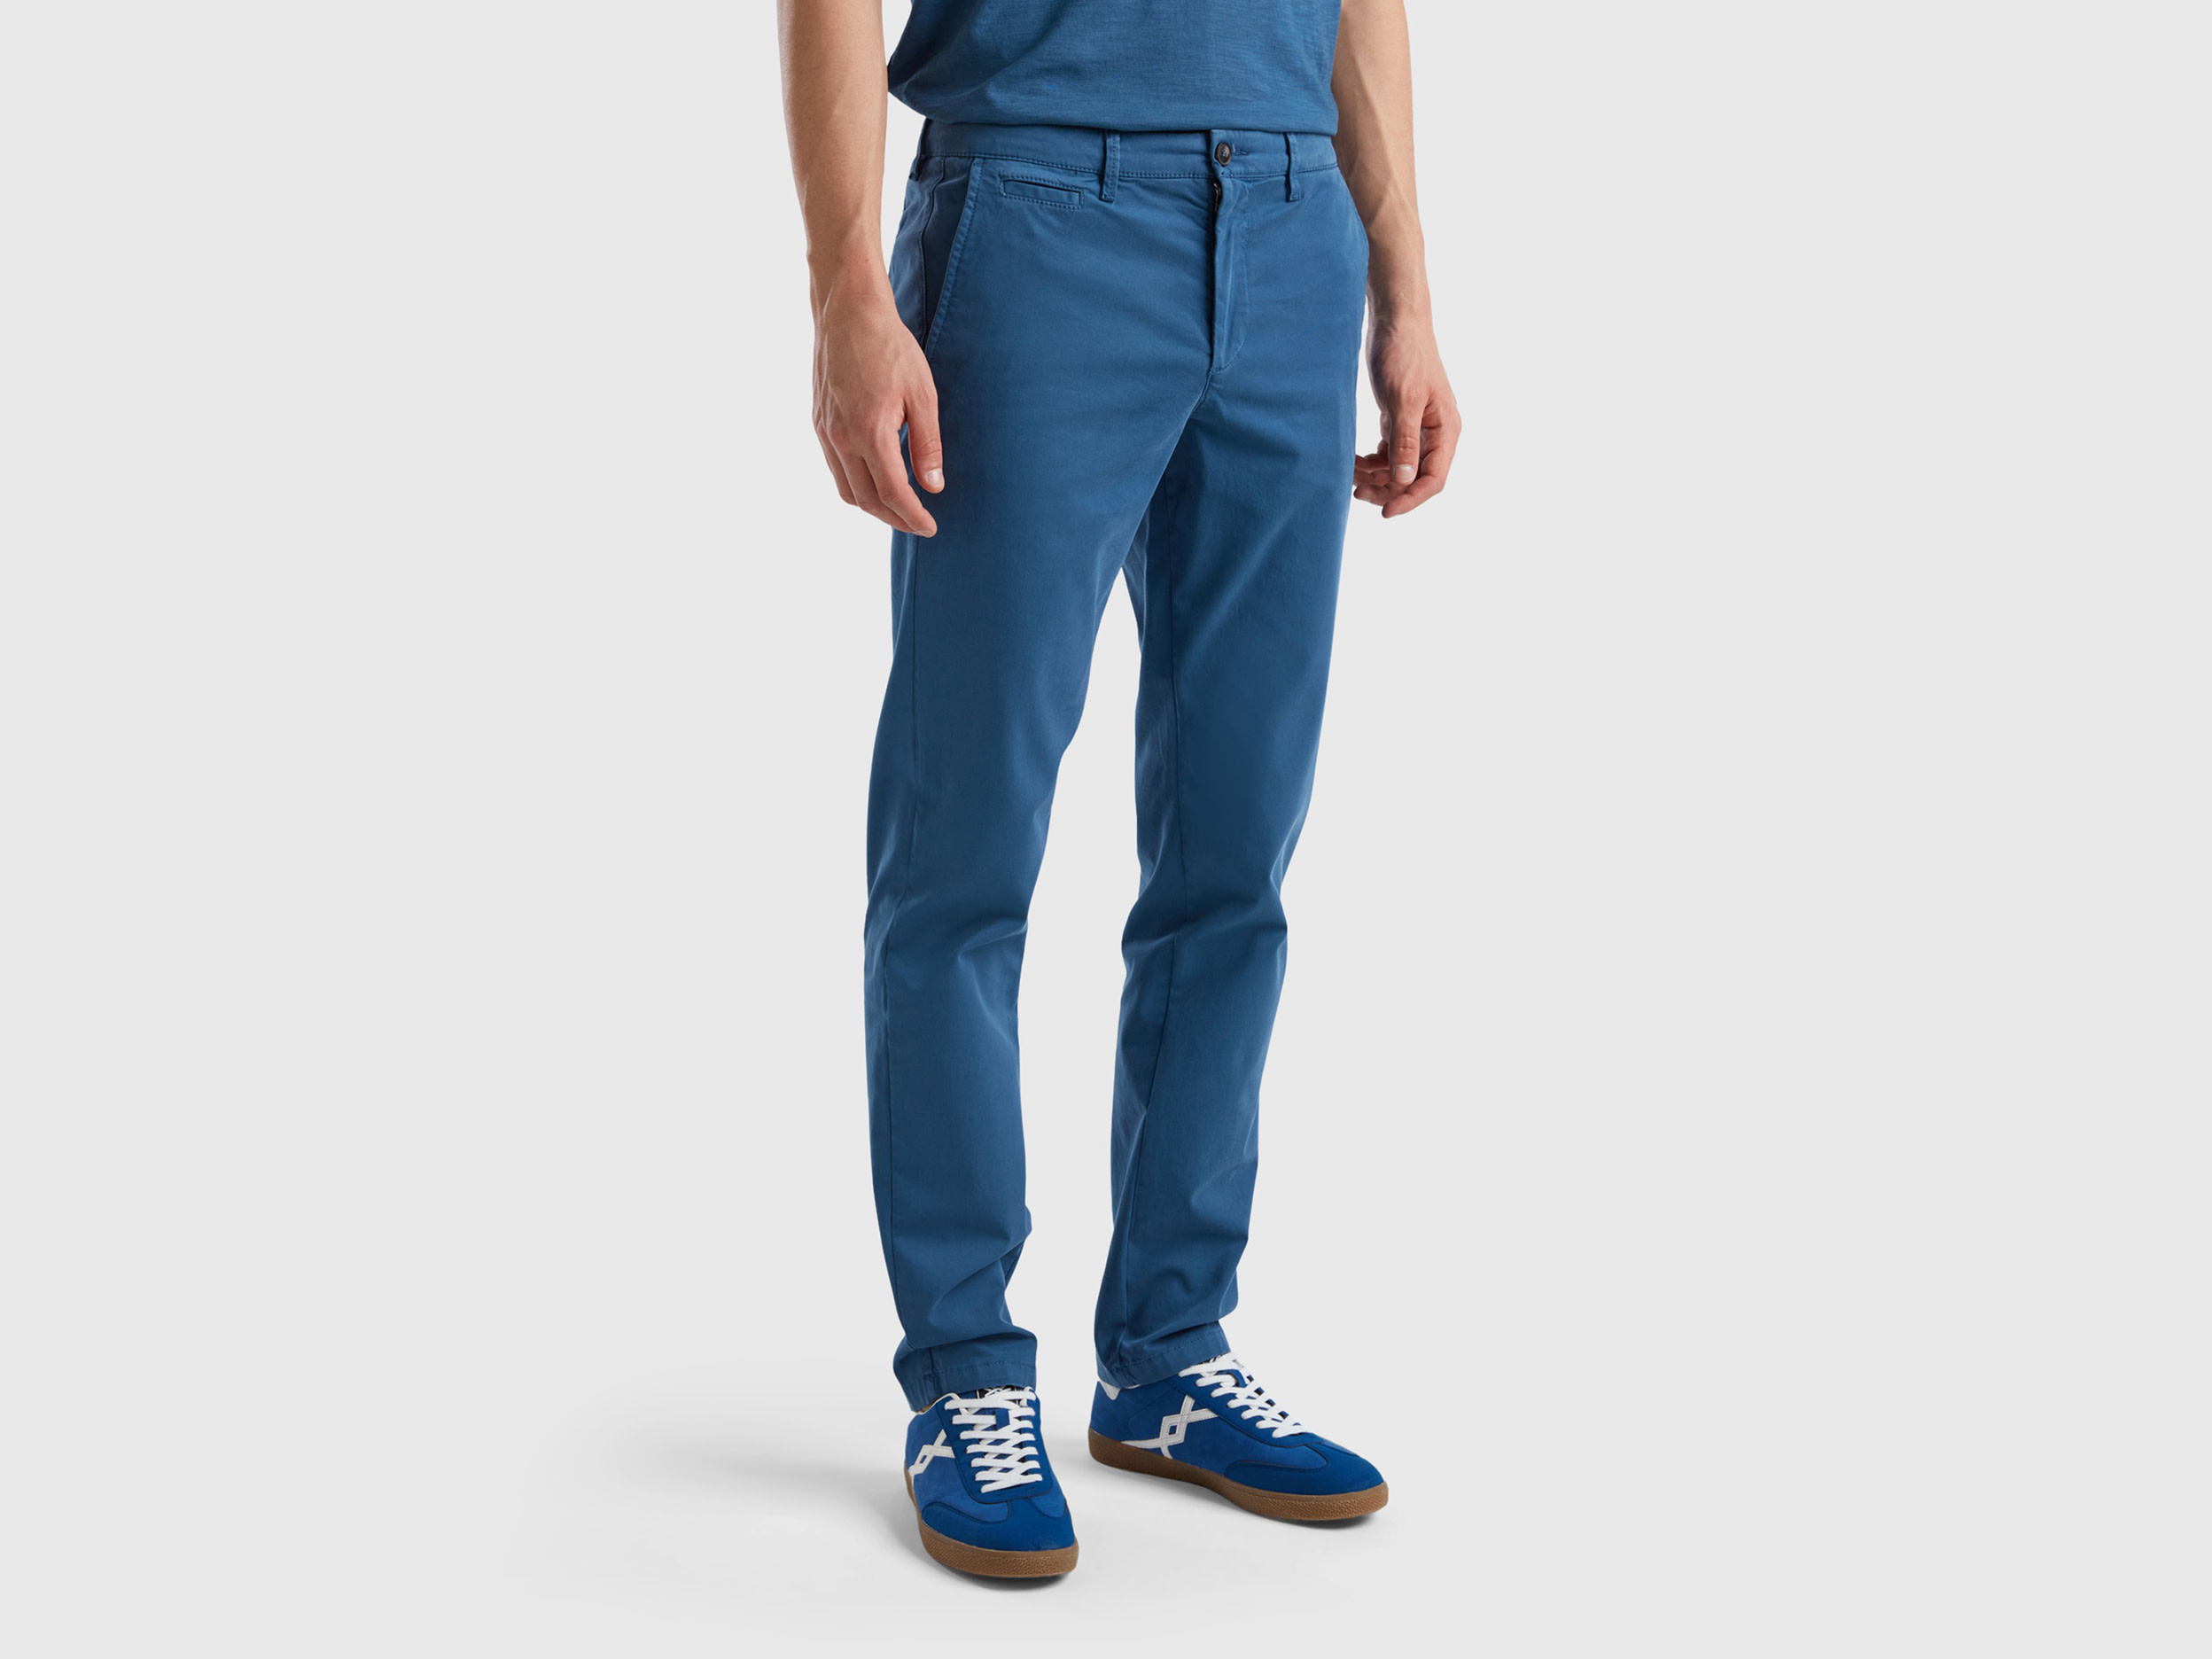 Benetton, Air Force Blue Slim Fit Chinos, size 38, Air Force Blue, Men